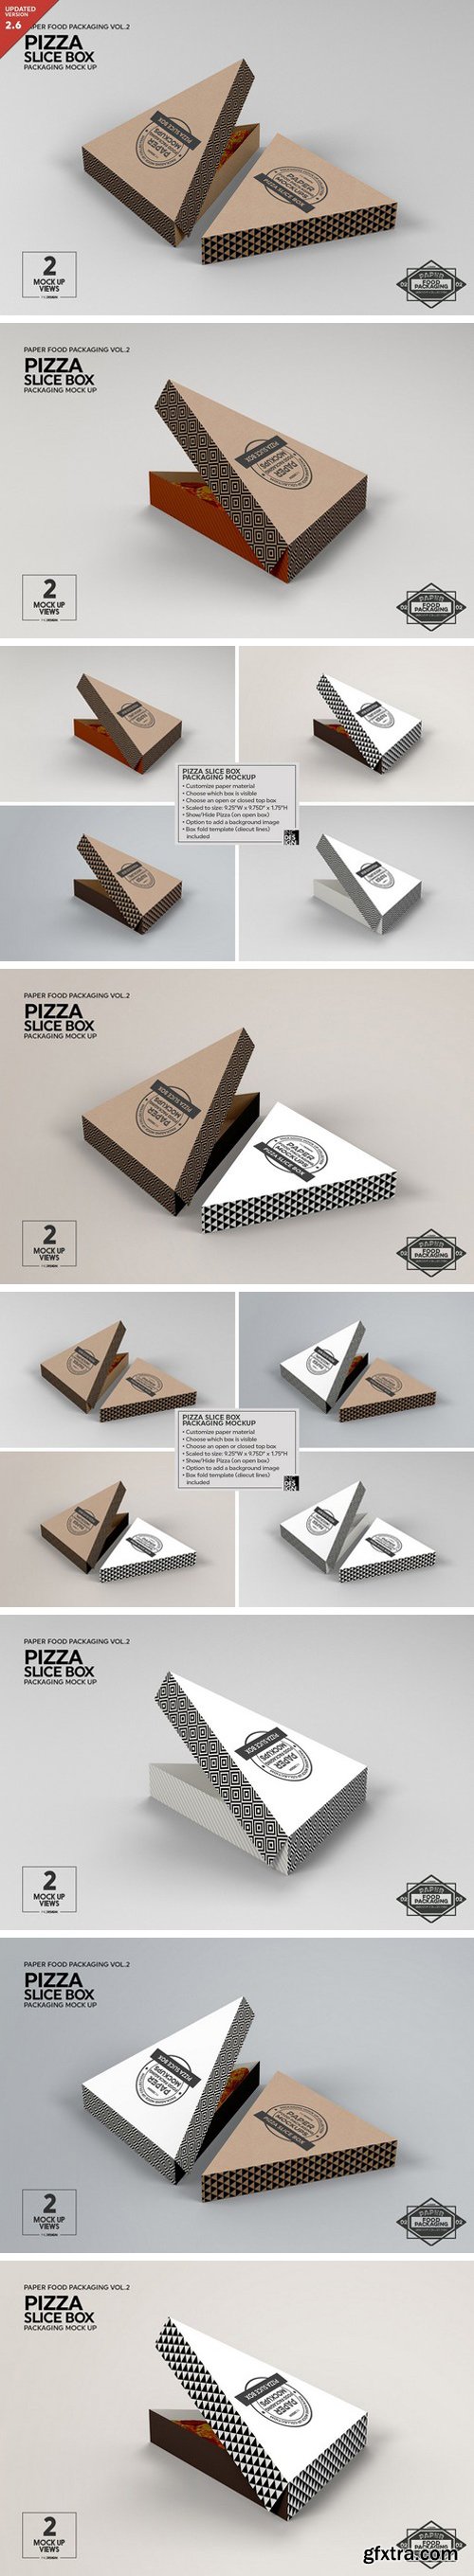 Download 32 Design Mockup Triangle Slice Box Yellowimages PSD Mockup Templates